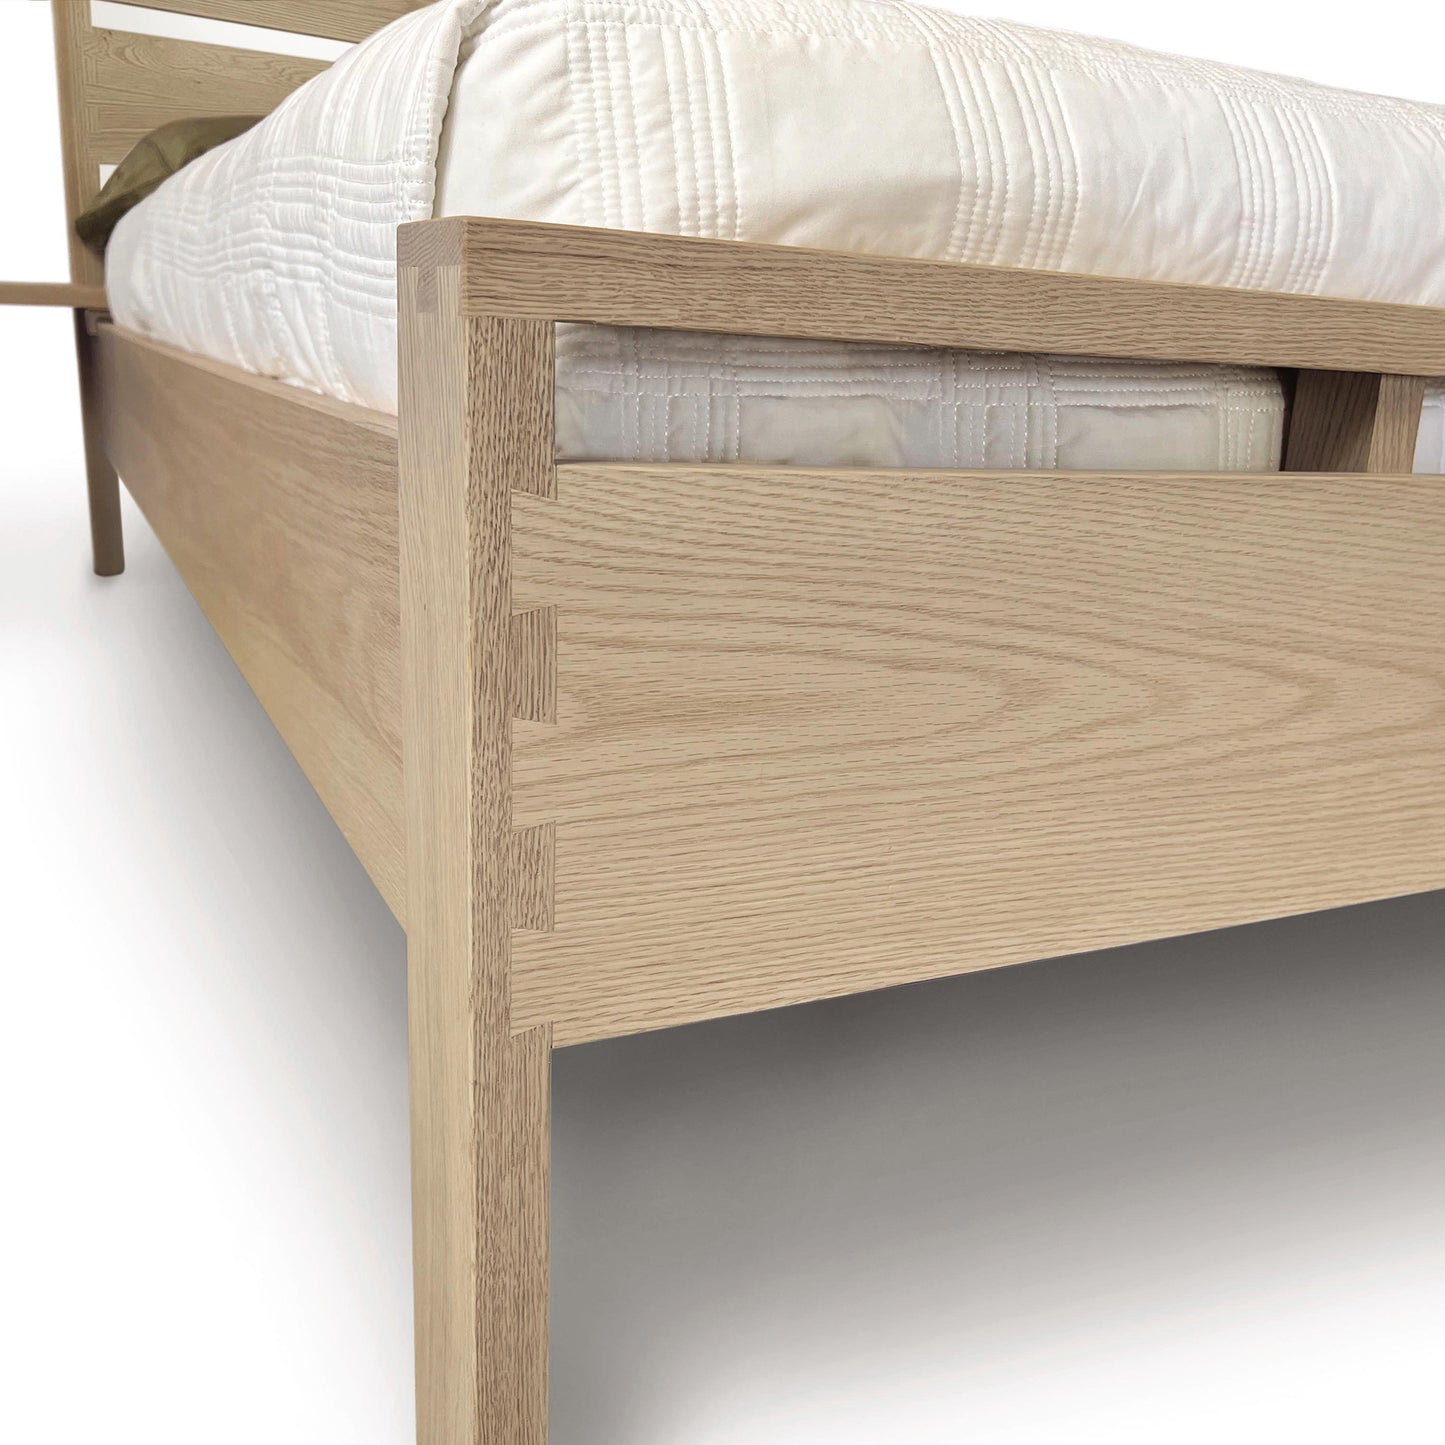 Part of a minimalist Copeland Furniture Oslo Platform Bed frame with a clear focus on the solid oak hardwood headboard and corner joint, showcasing the wood grain and construction details.